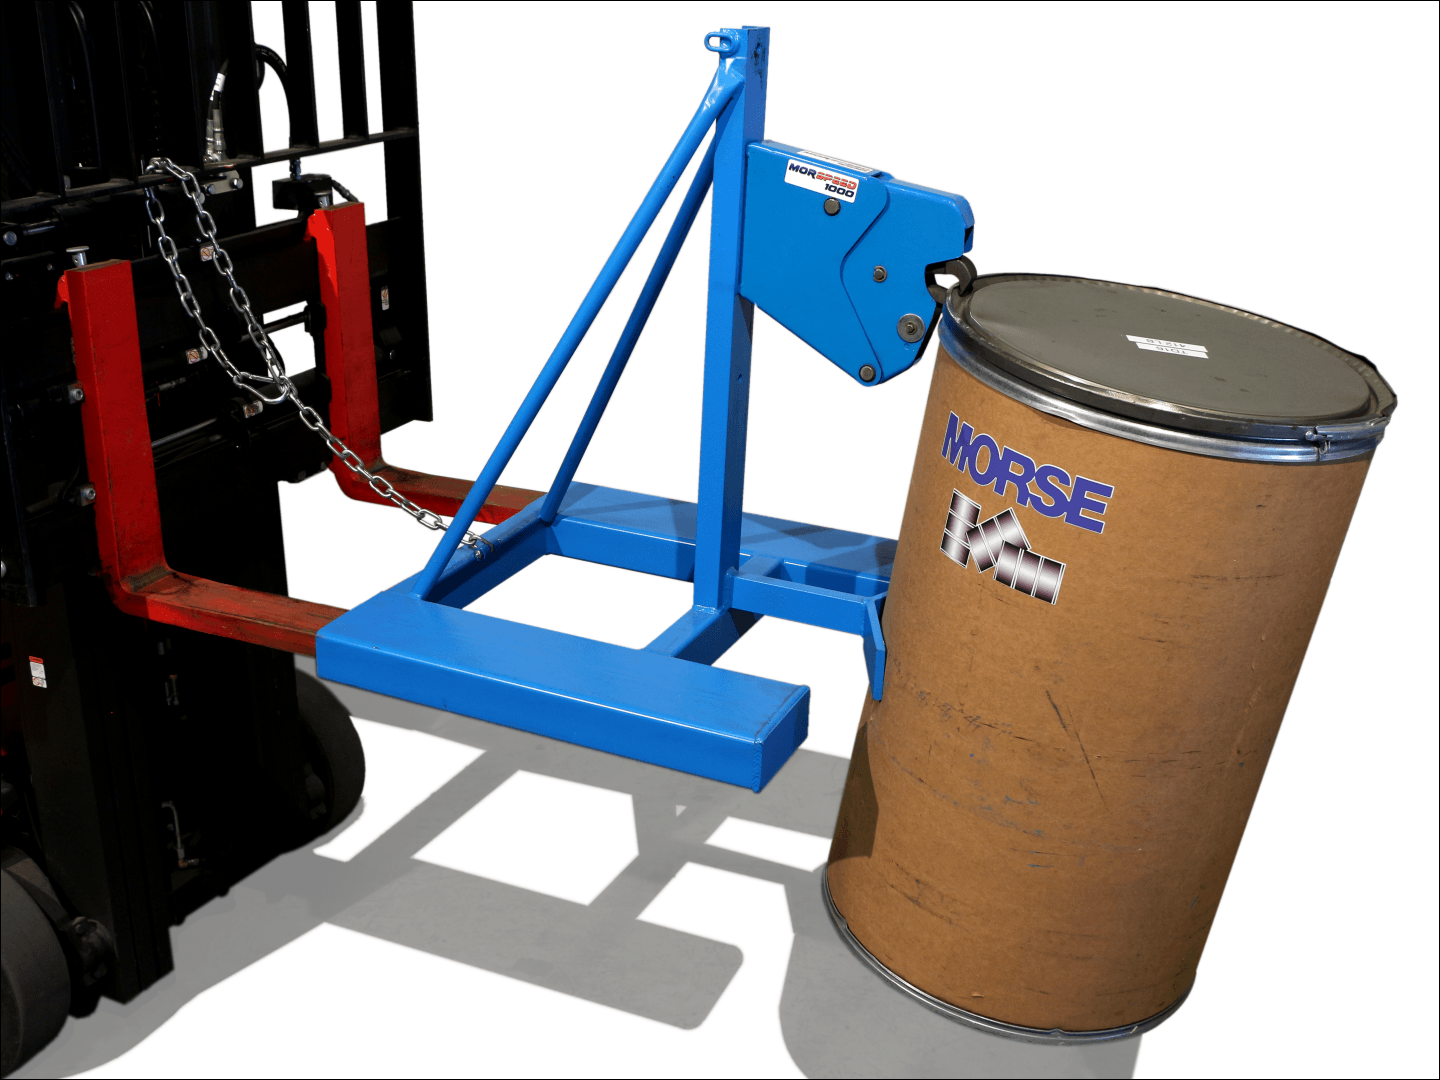 Morse Model 286-1 morspeed 1000 forklift attachment, one drum handler, 1 head for drum, fork pockets are 16.5" apart, 1000 lb. capacity.